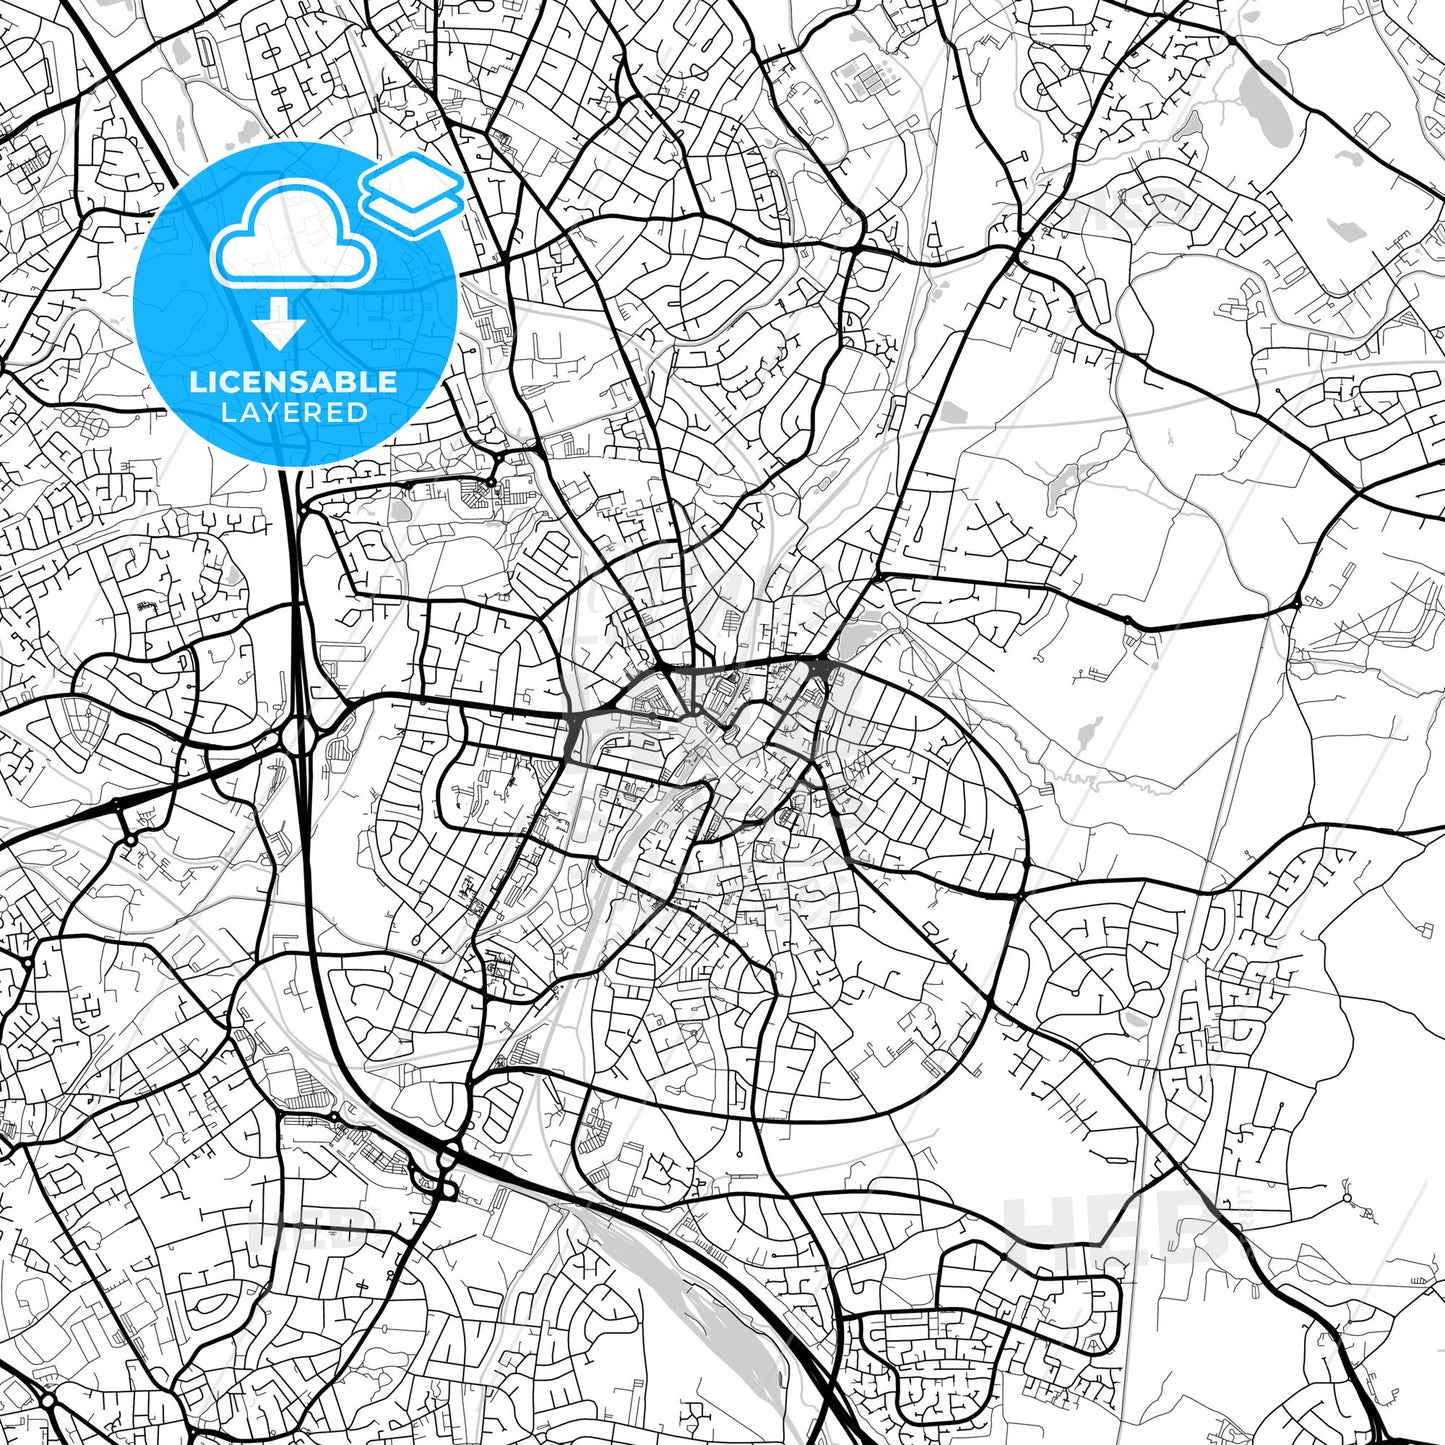 Layered PDF map of Walsall, West Midlands, England